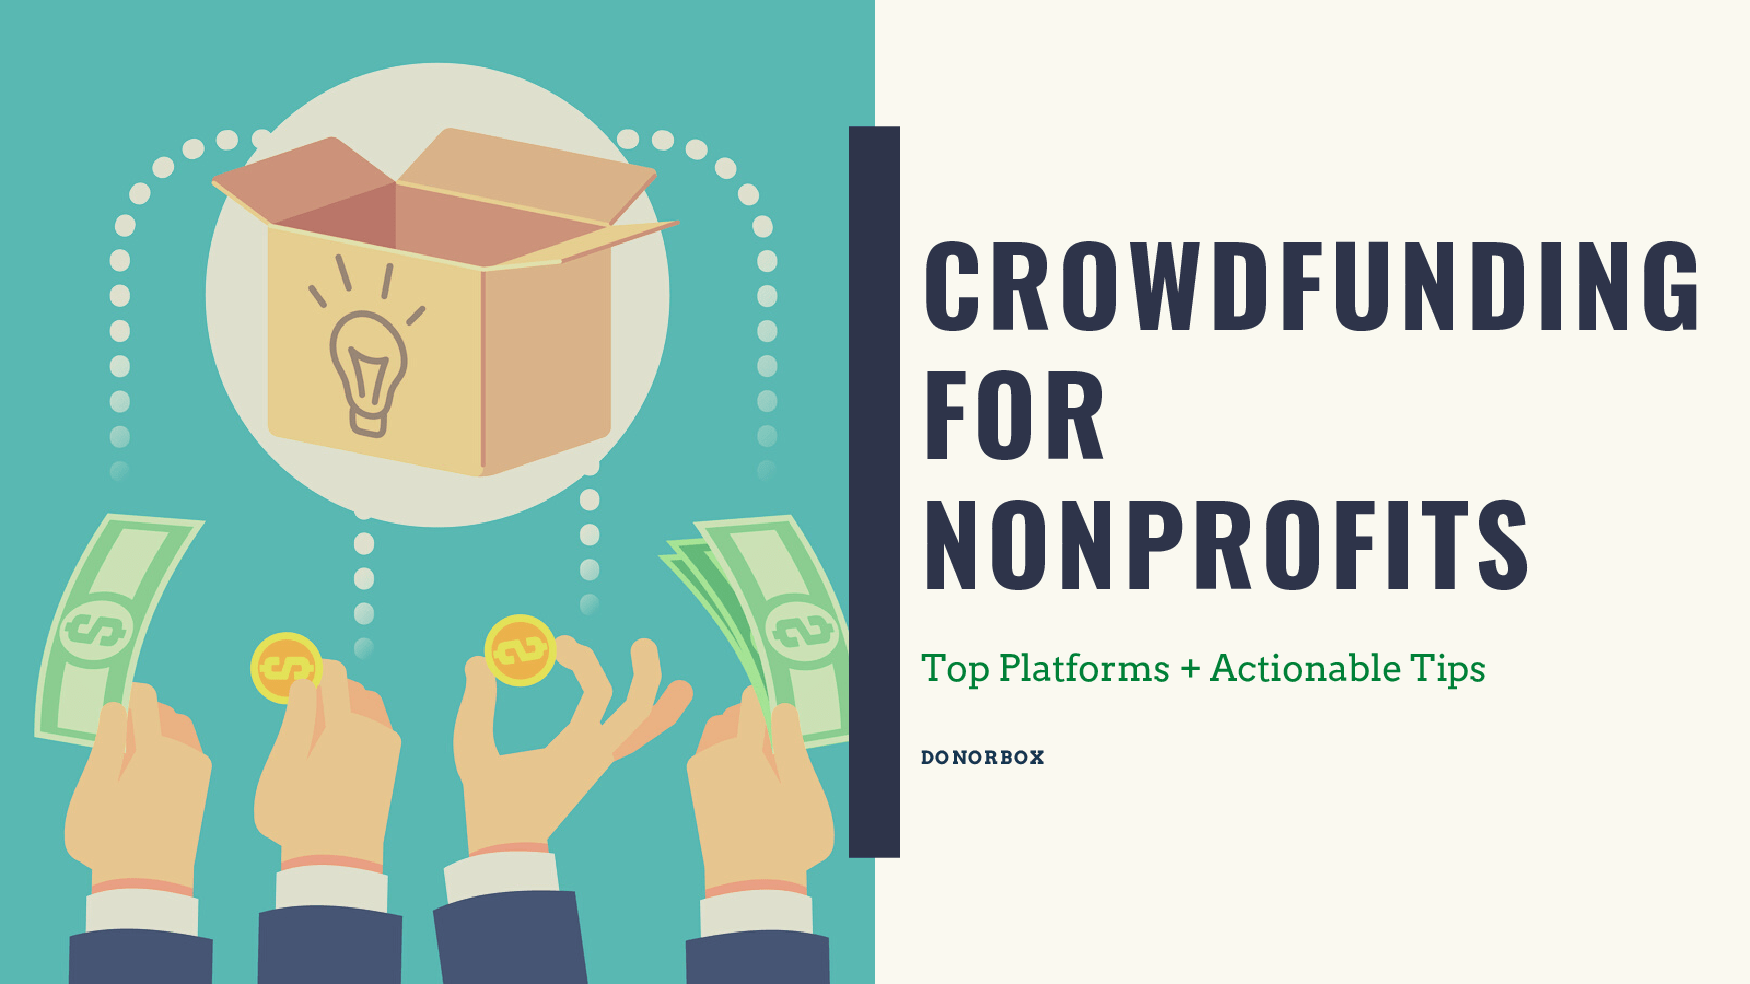 Crowdfunding for Nonprofits | Top 8 Crowdfunding Platforms and Tips